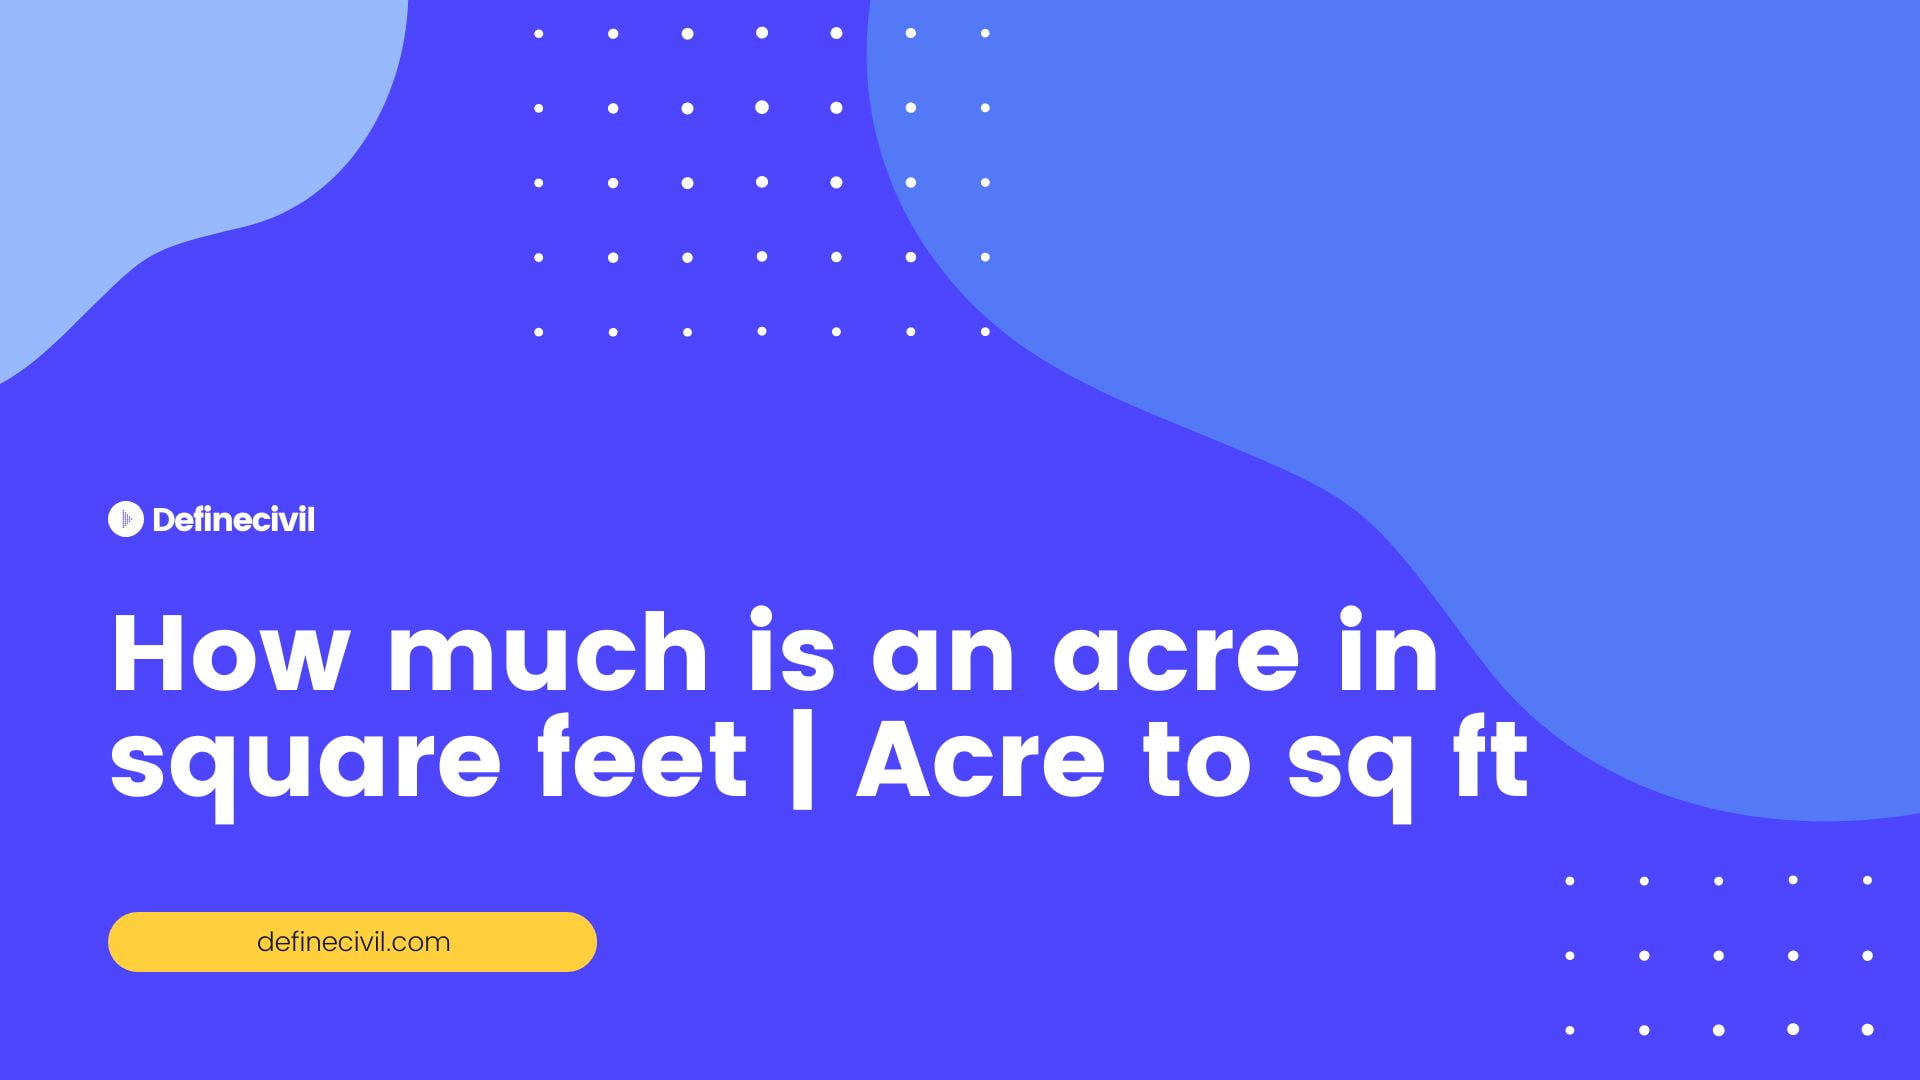 How much is an acre in square feet | Acre to sq ft